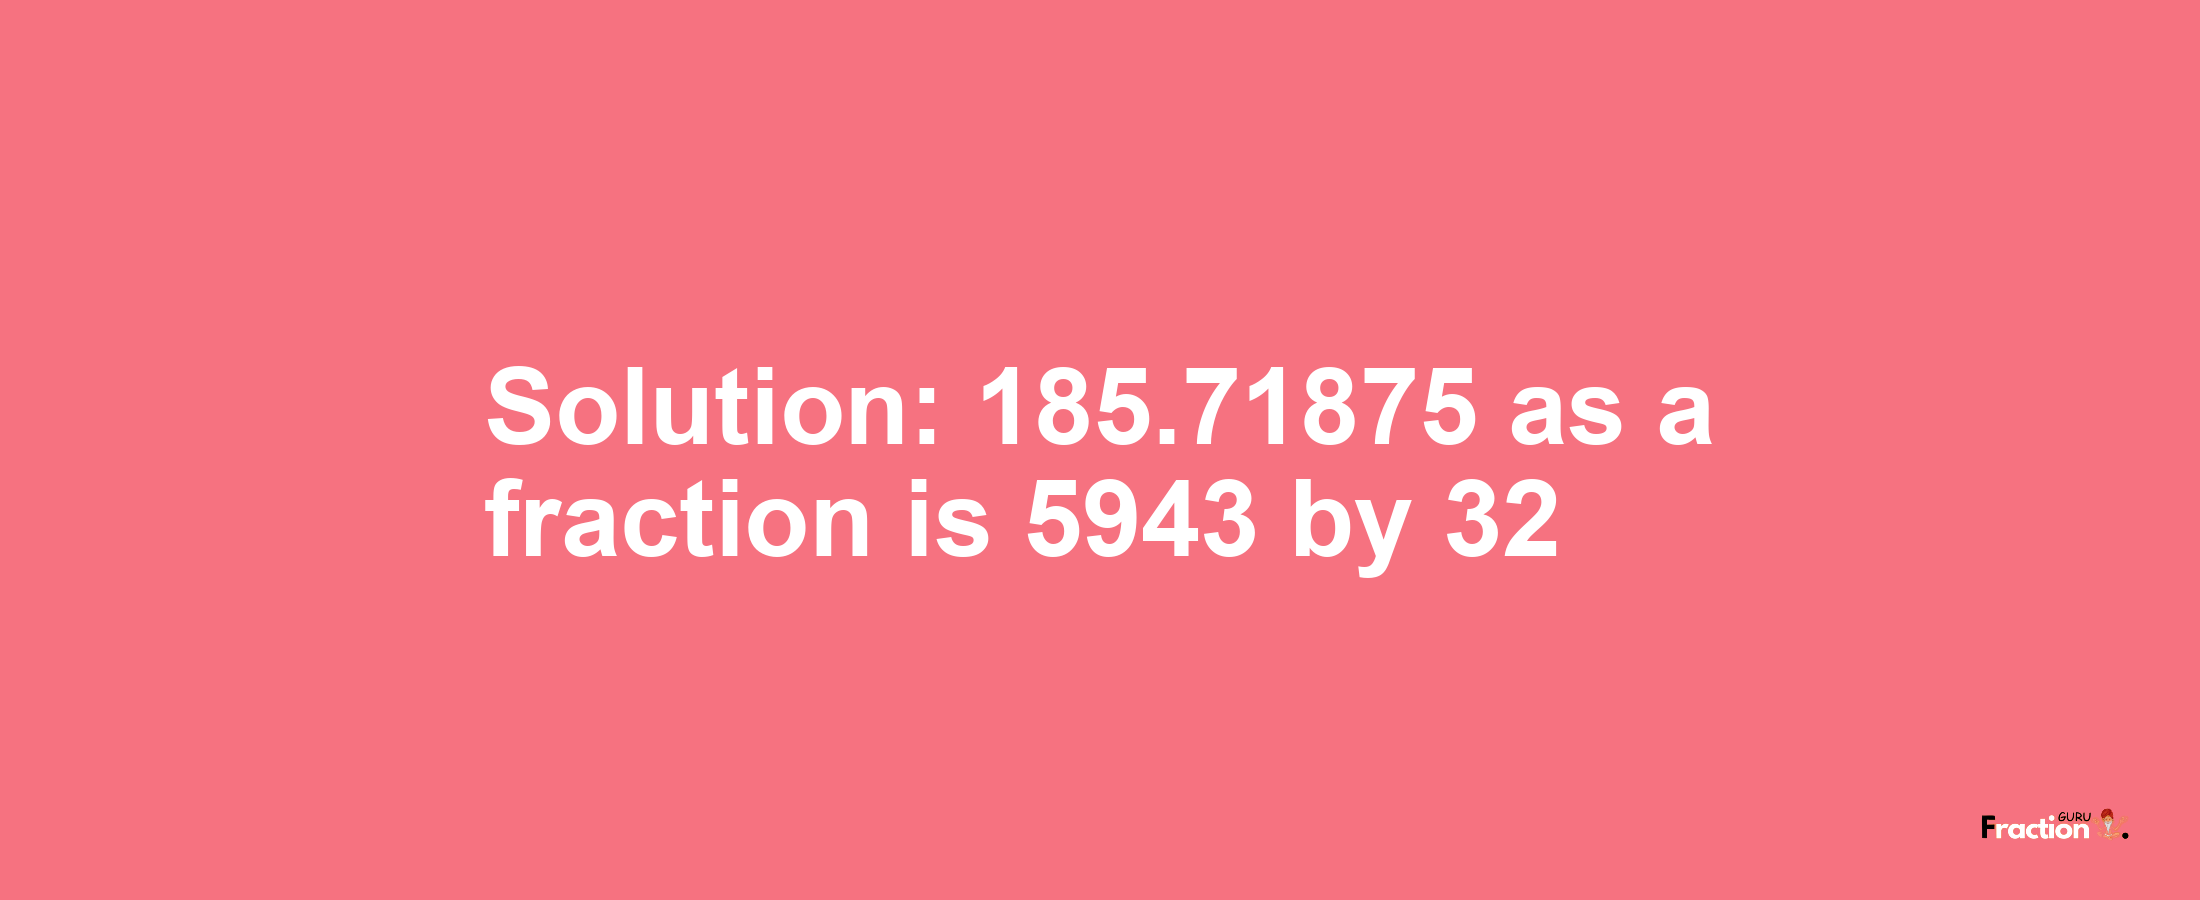 Solution:185.71875 as a fraction is 5943/32